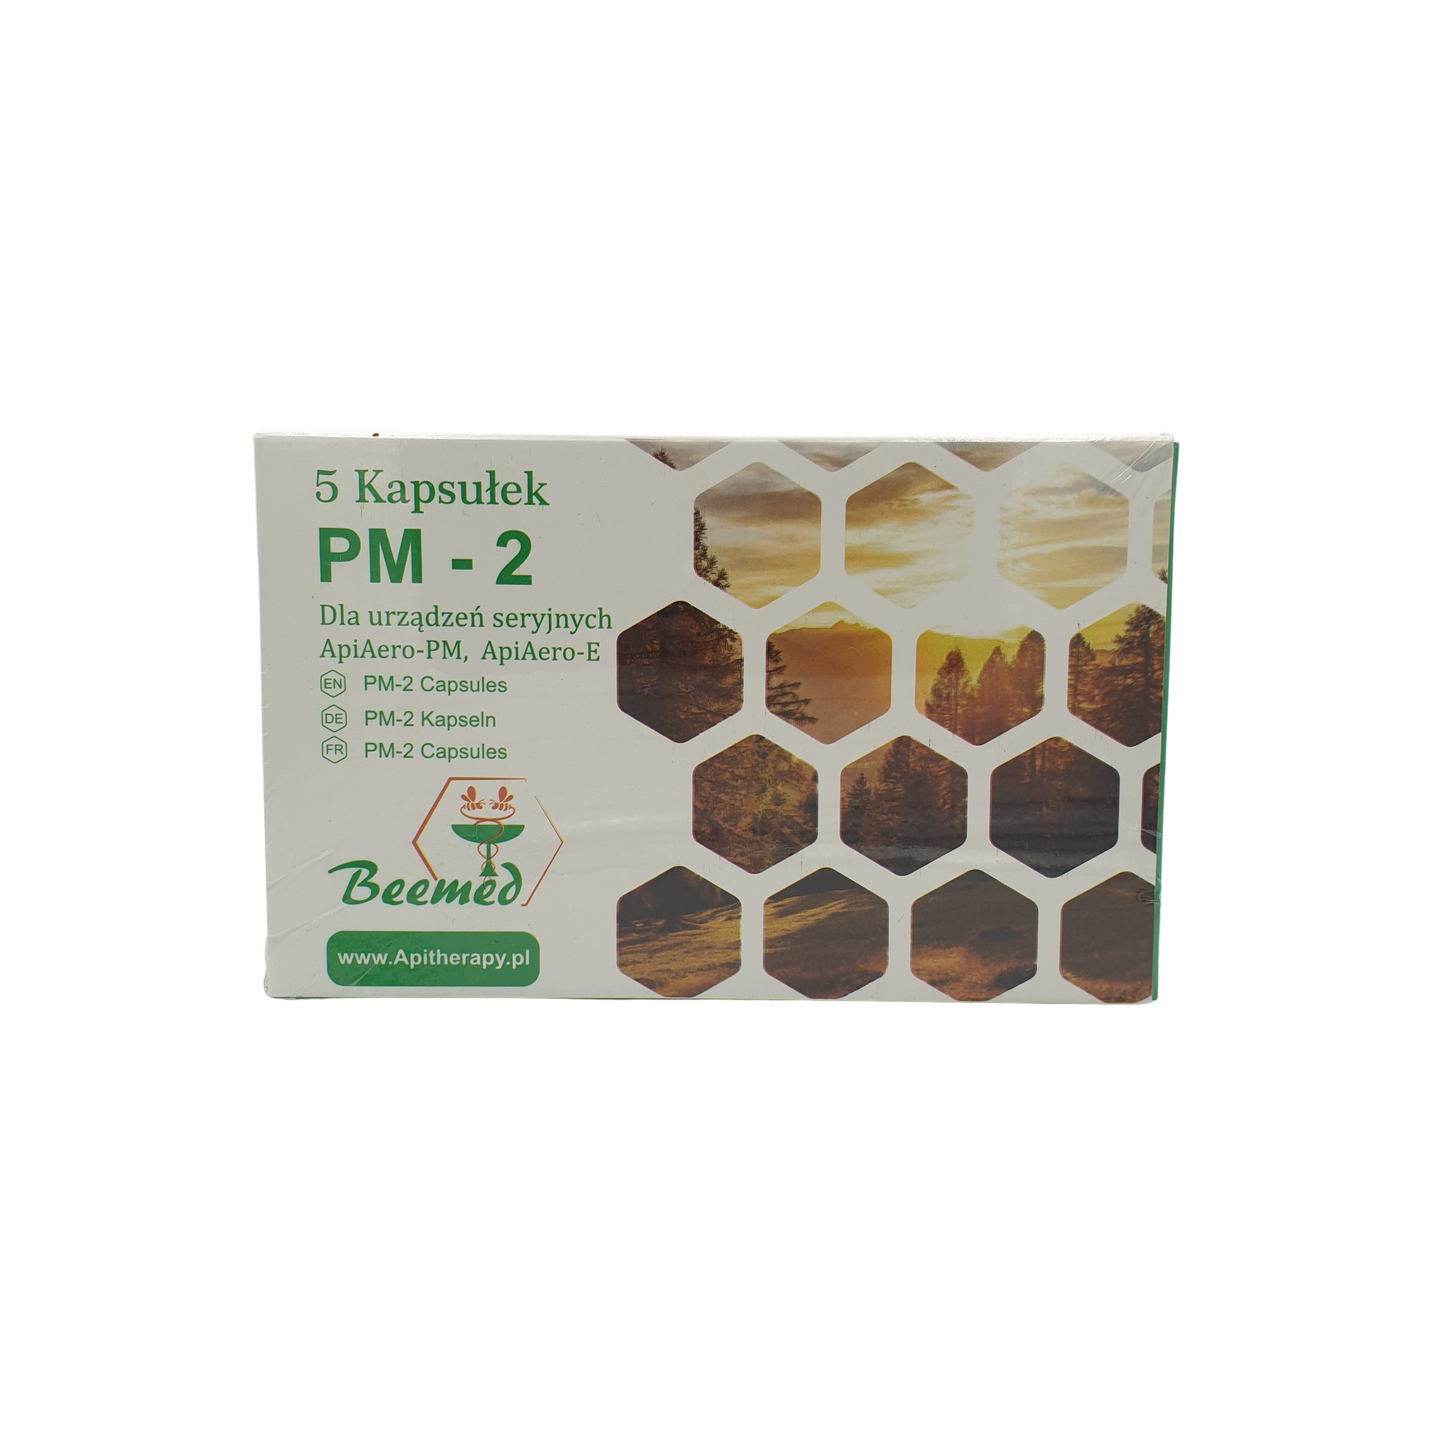 PM-2 capsules for Propoltherapy